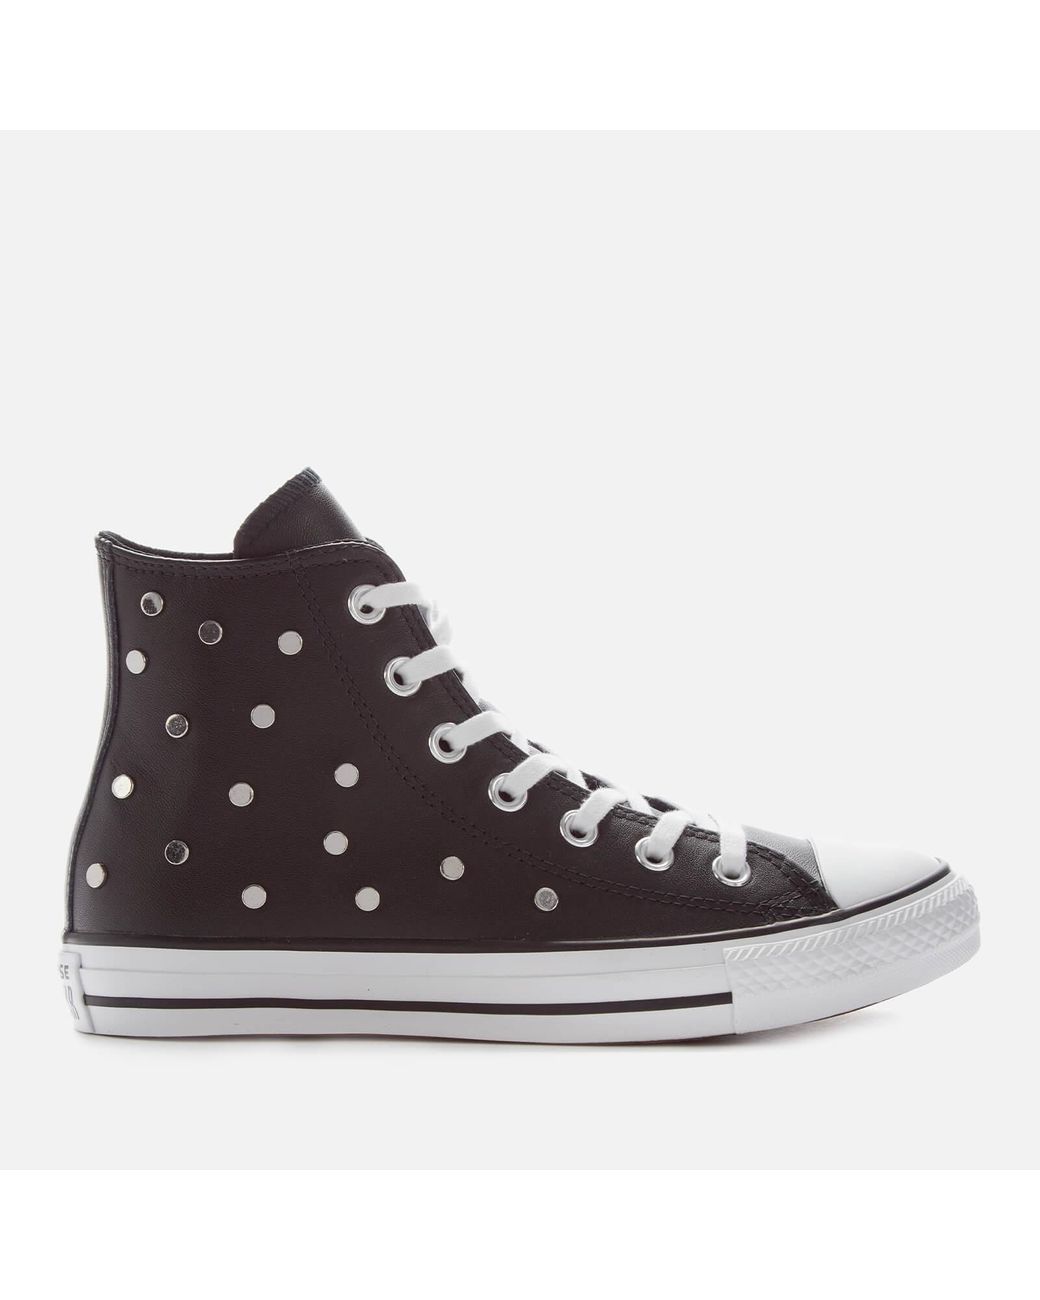 Converse Chuck Taylor All Star Studded Hi-top Trainers in Black | Lyst UK